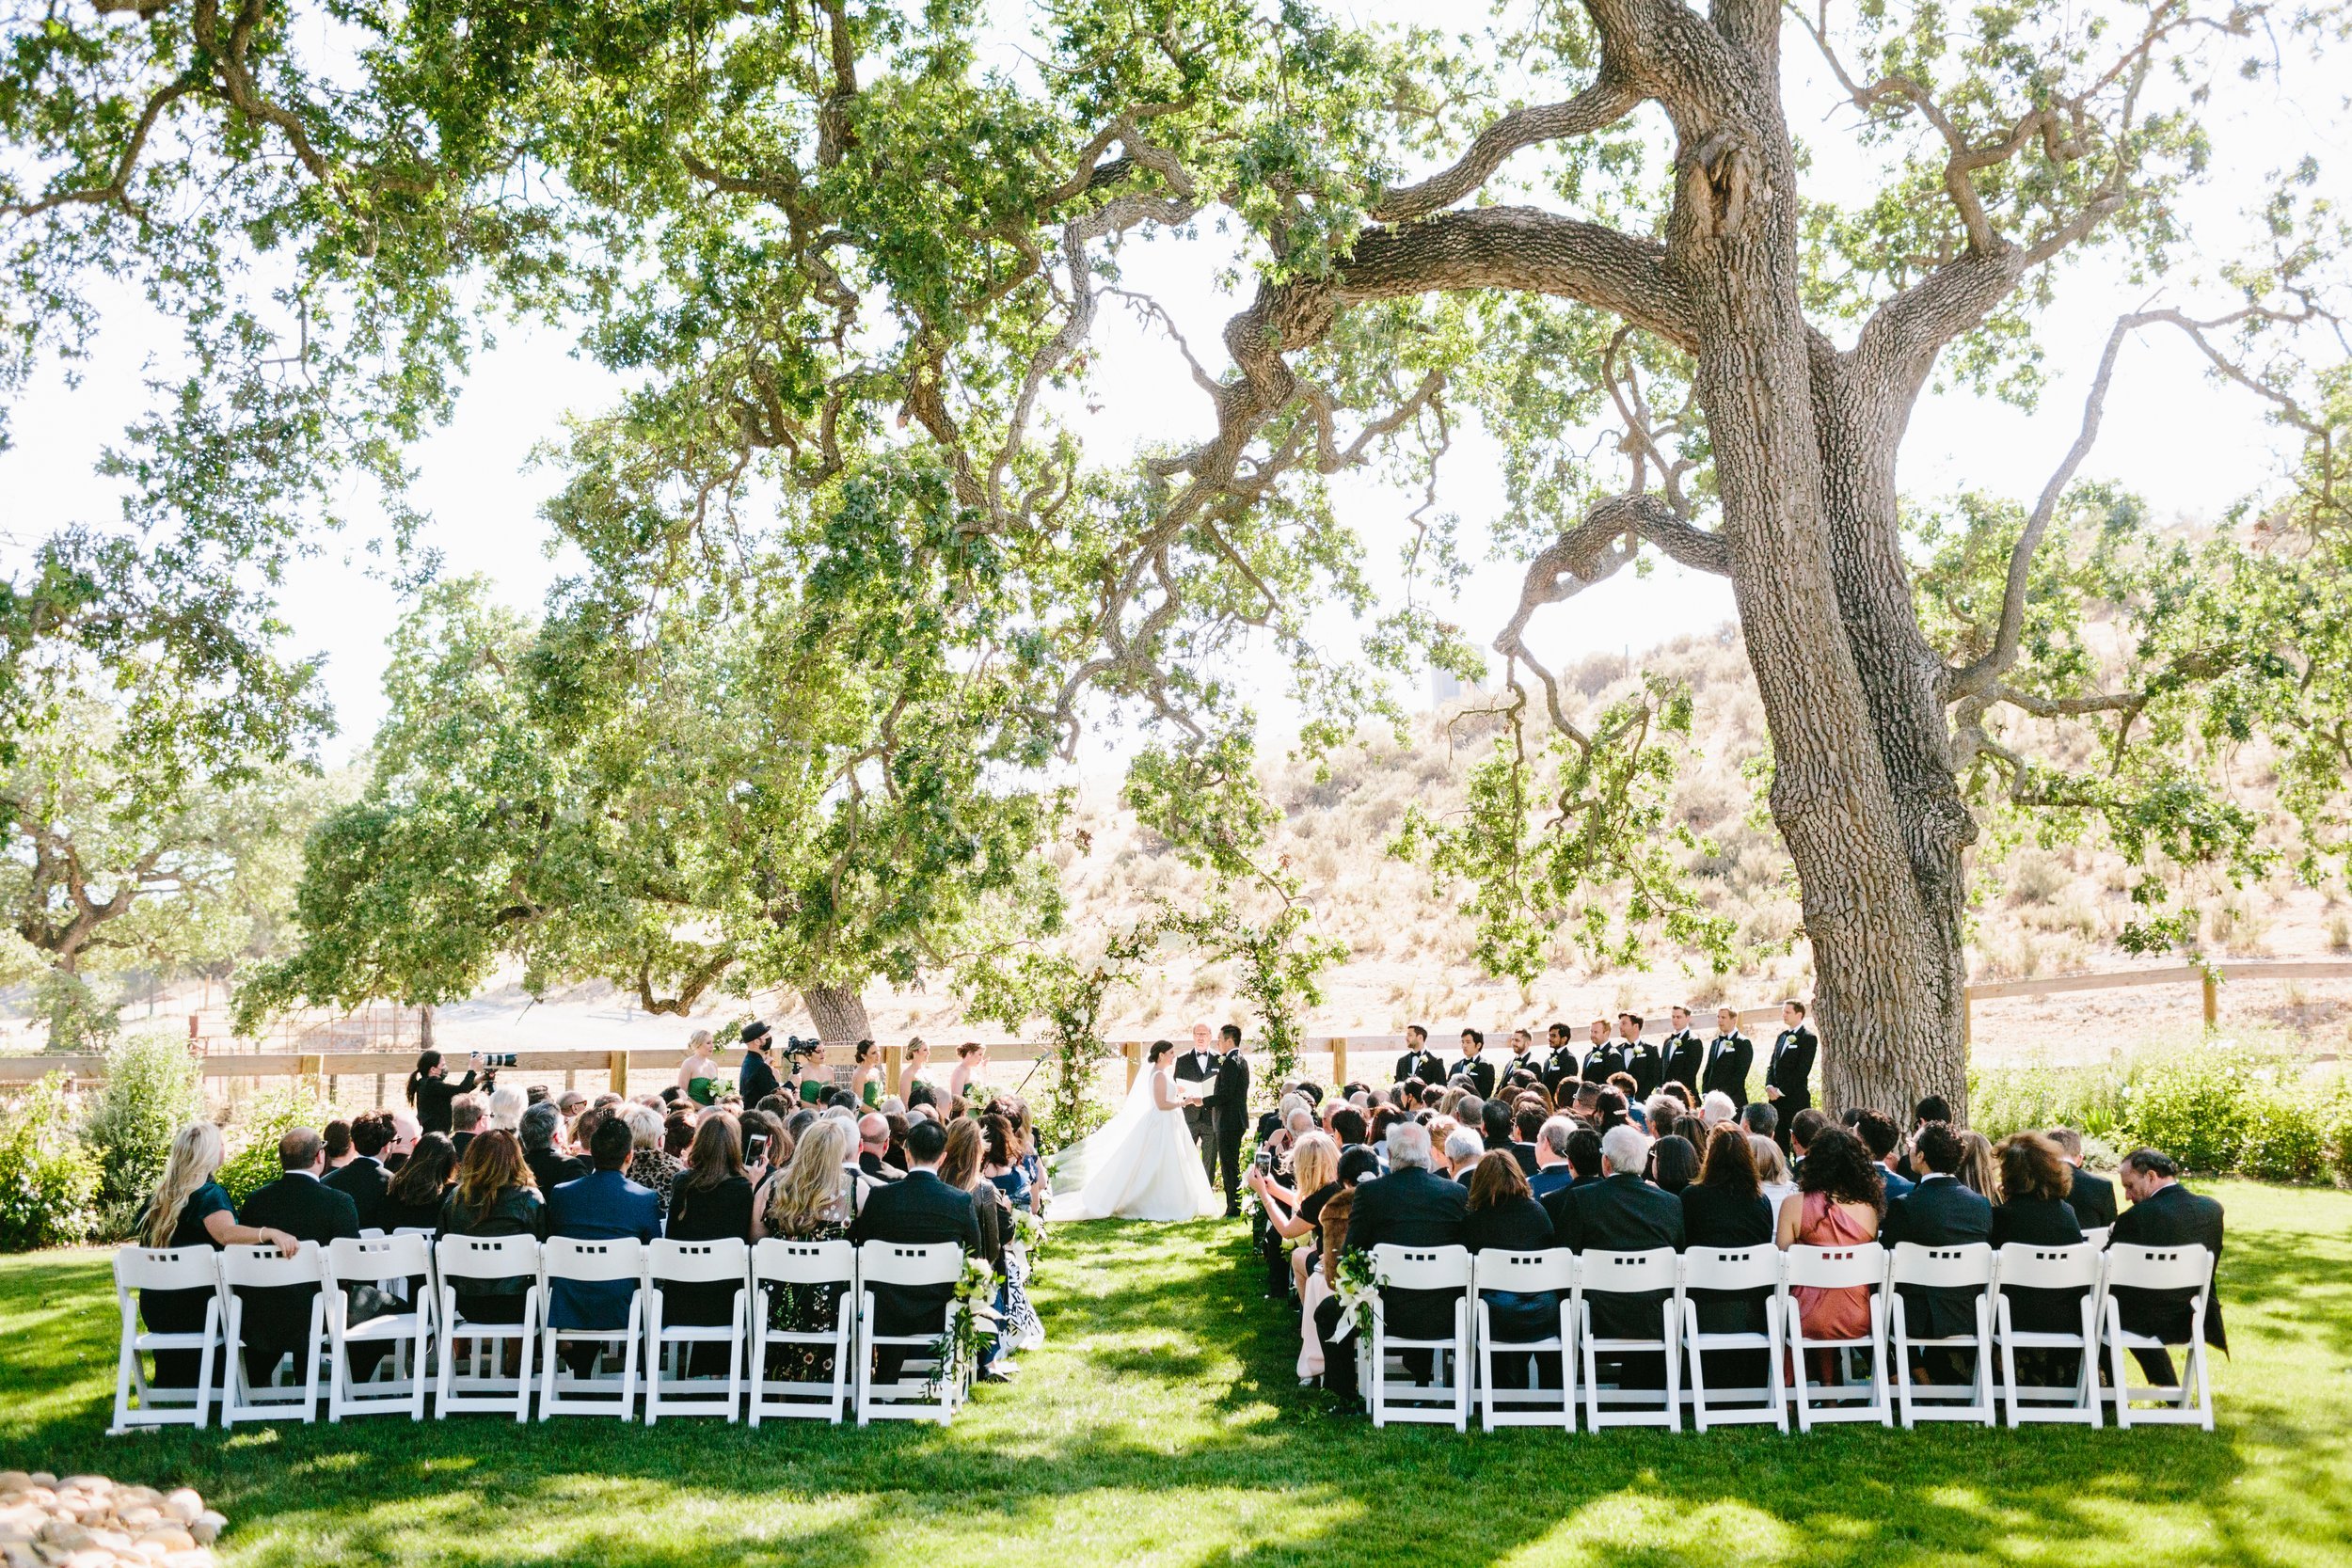 www.santabarbarawedding.com | Foxen Canyon Ranch | Jodee Debes Photography | LVL Weddings |   Jerry Palmer Flowers | Bright Event Rentals | The Society Band | Janet Villa | The Ceremony 